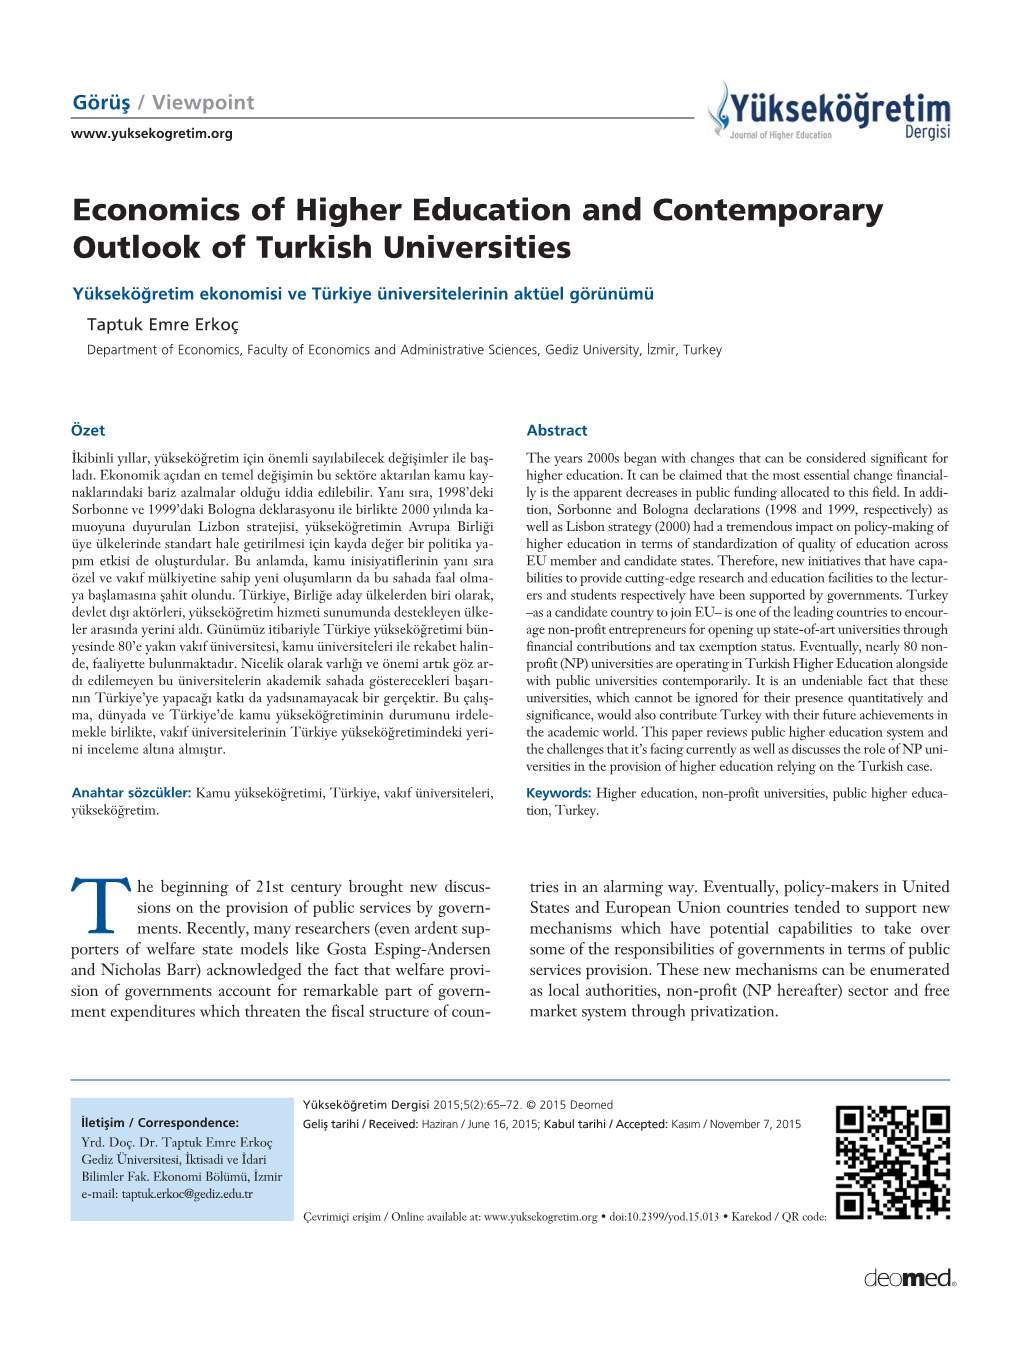 Economics of Higher Education and Contemporary Outlook of Turkish Universities